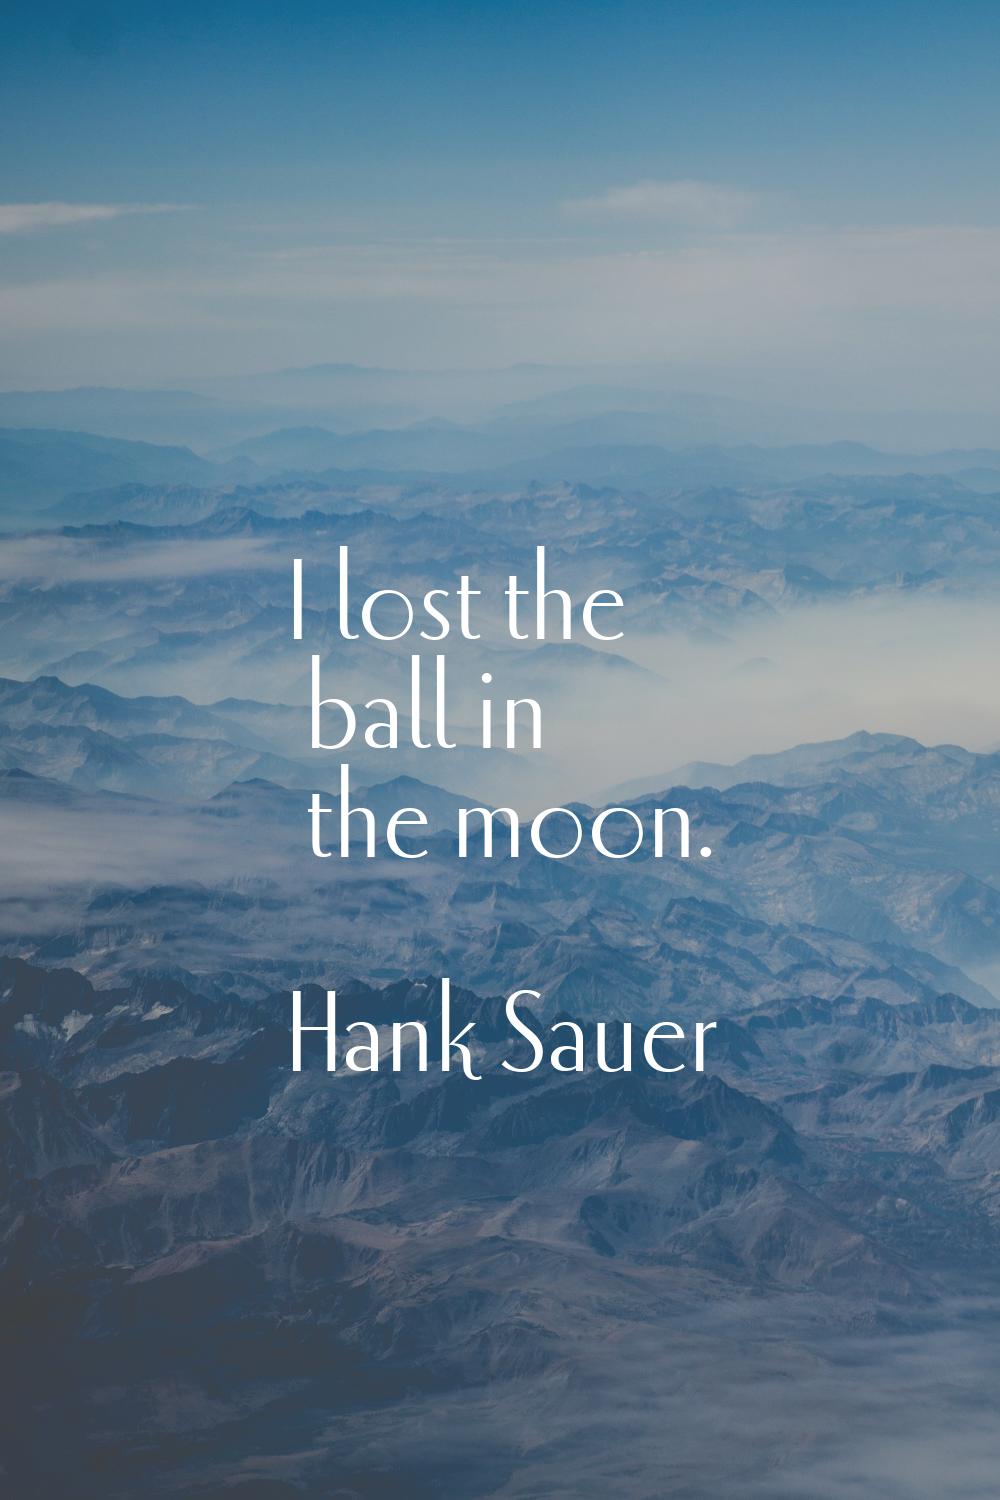 I lost the ball in the moon.